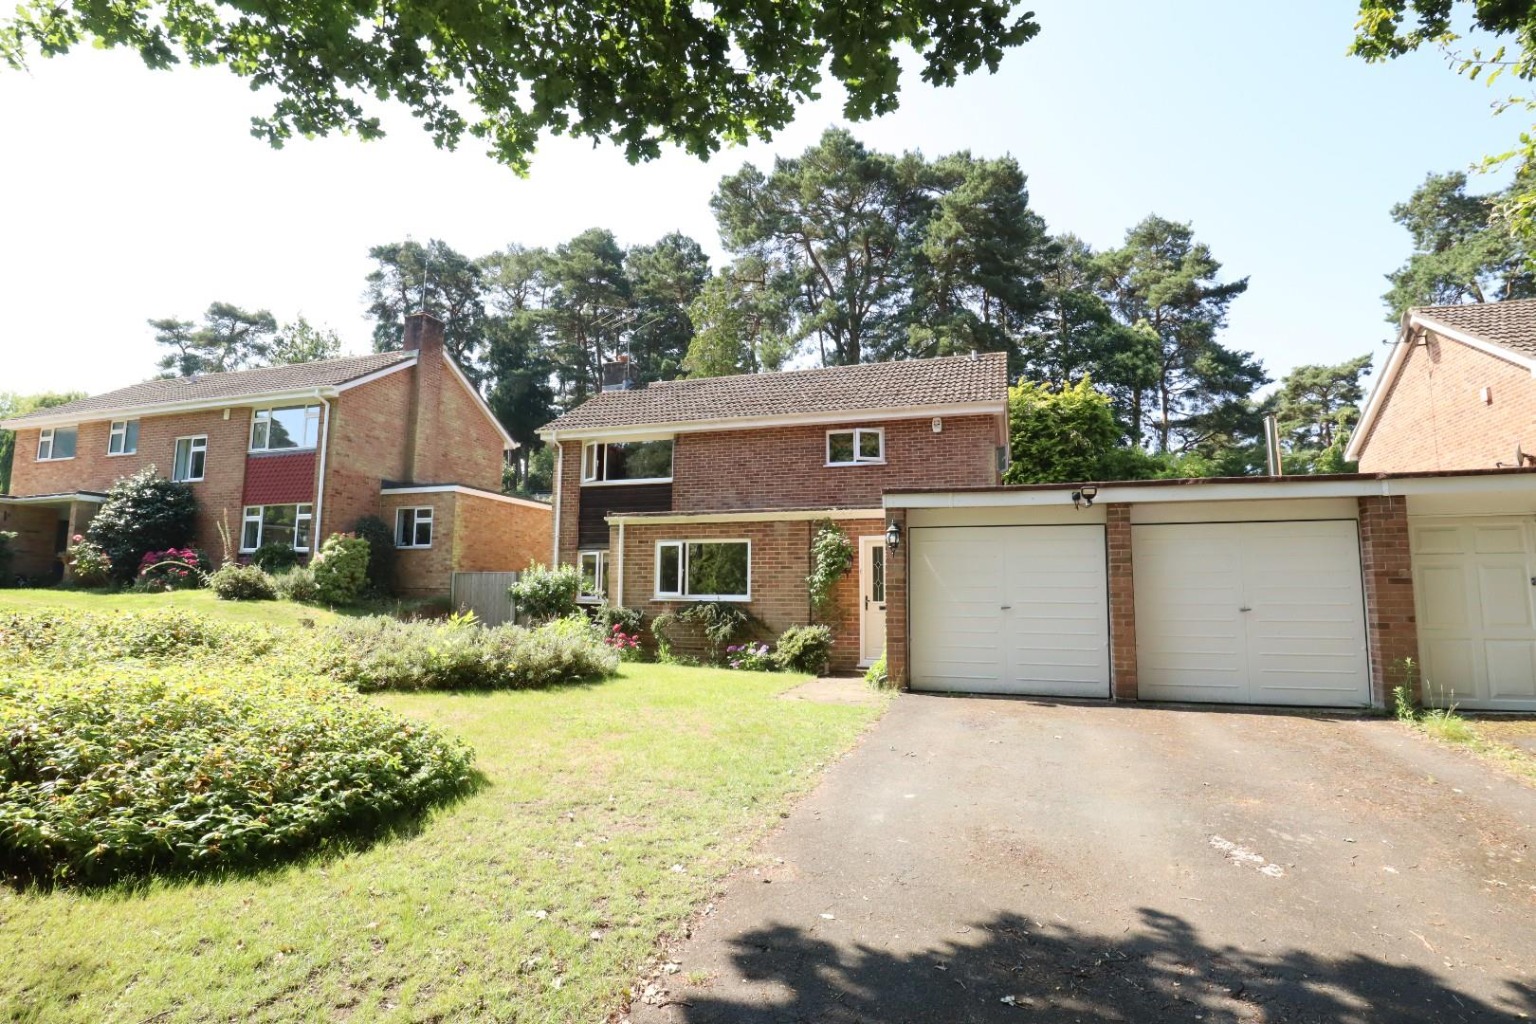 3 bed link detached house for sale in Roundway Close, Camberley, GU15